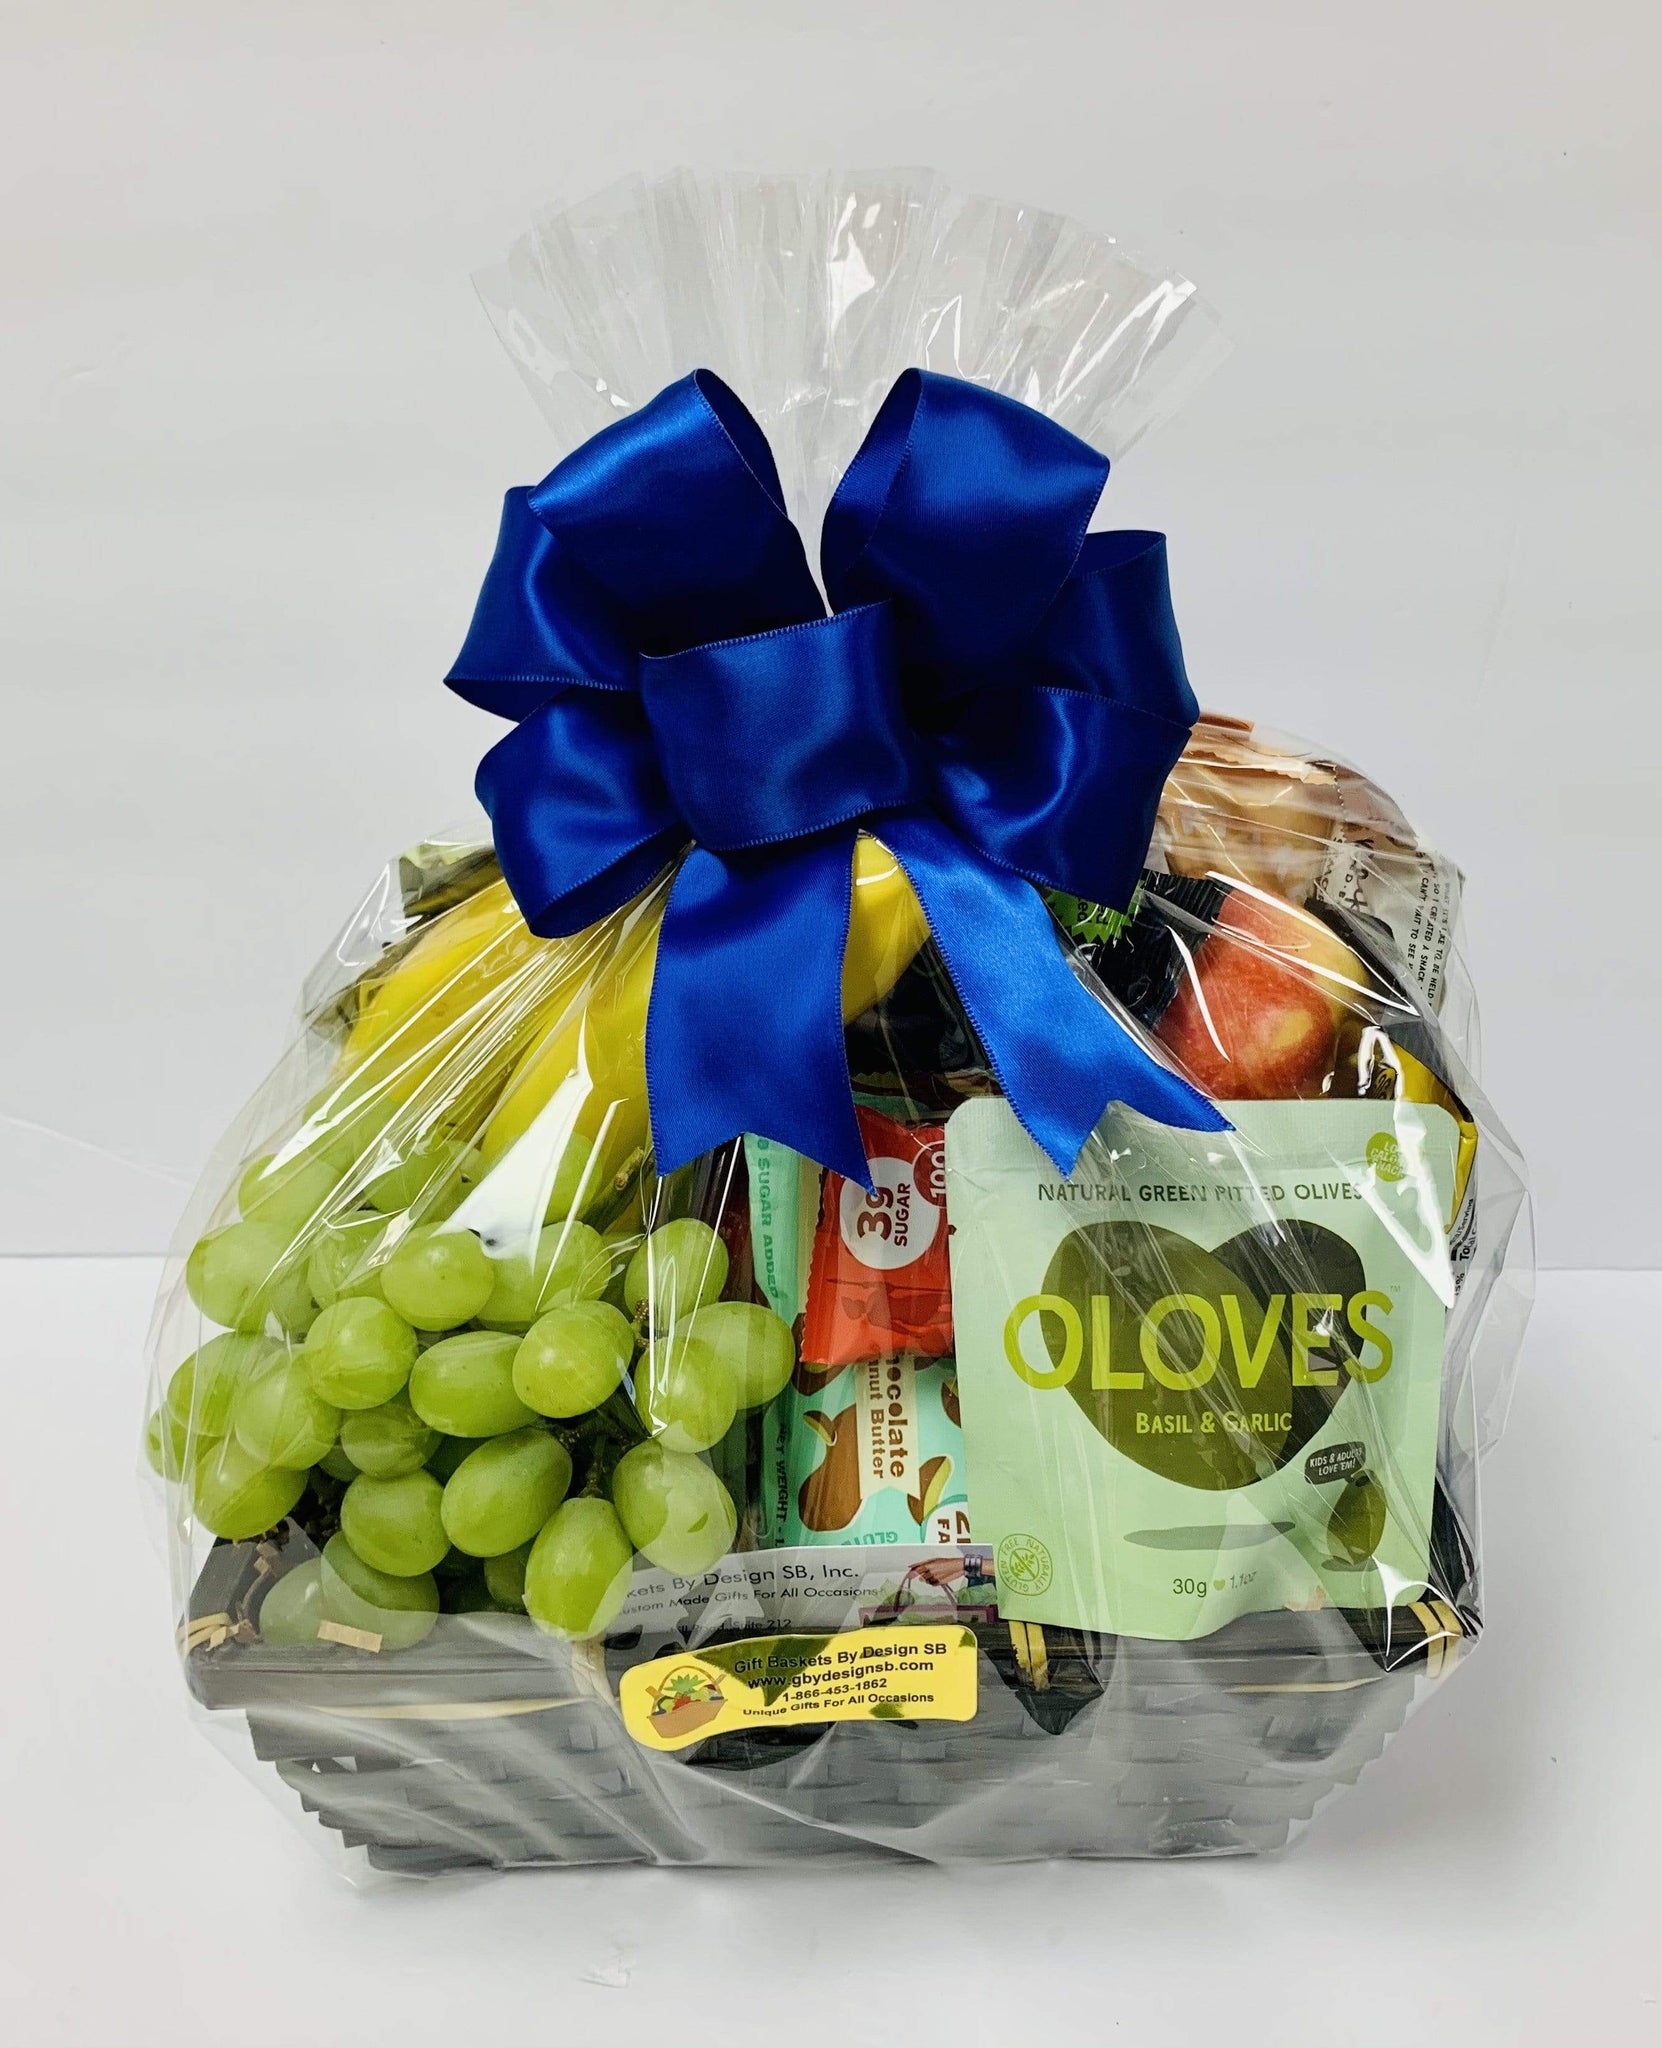 Keto Gift Baskets - Low Carb Gifts